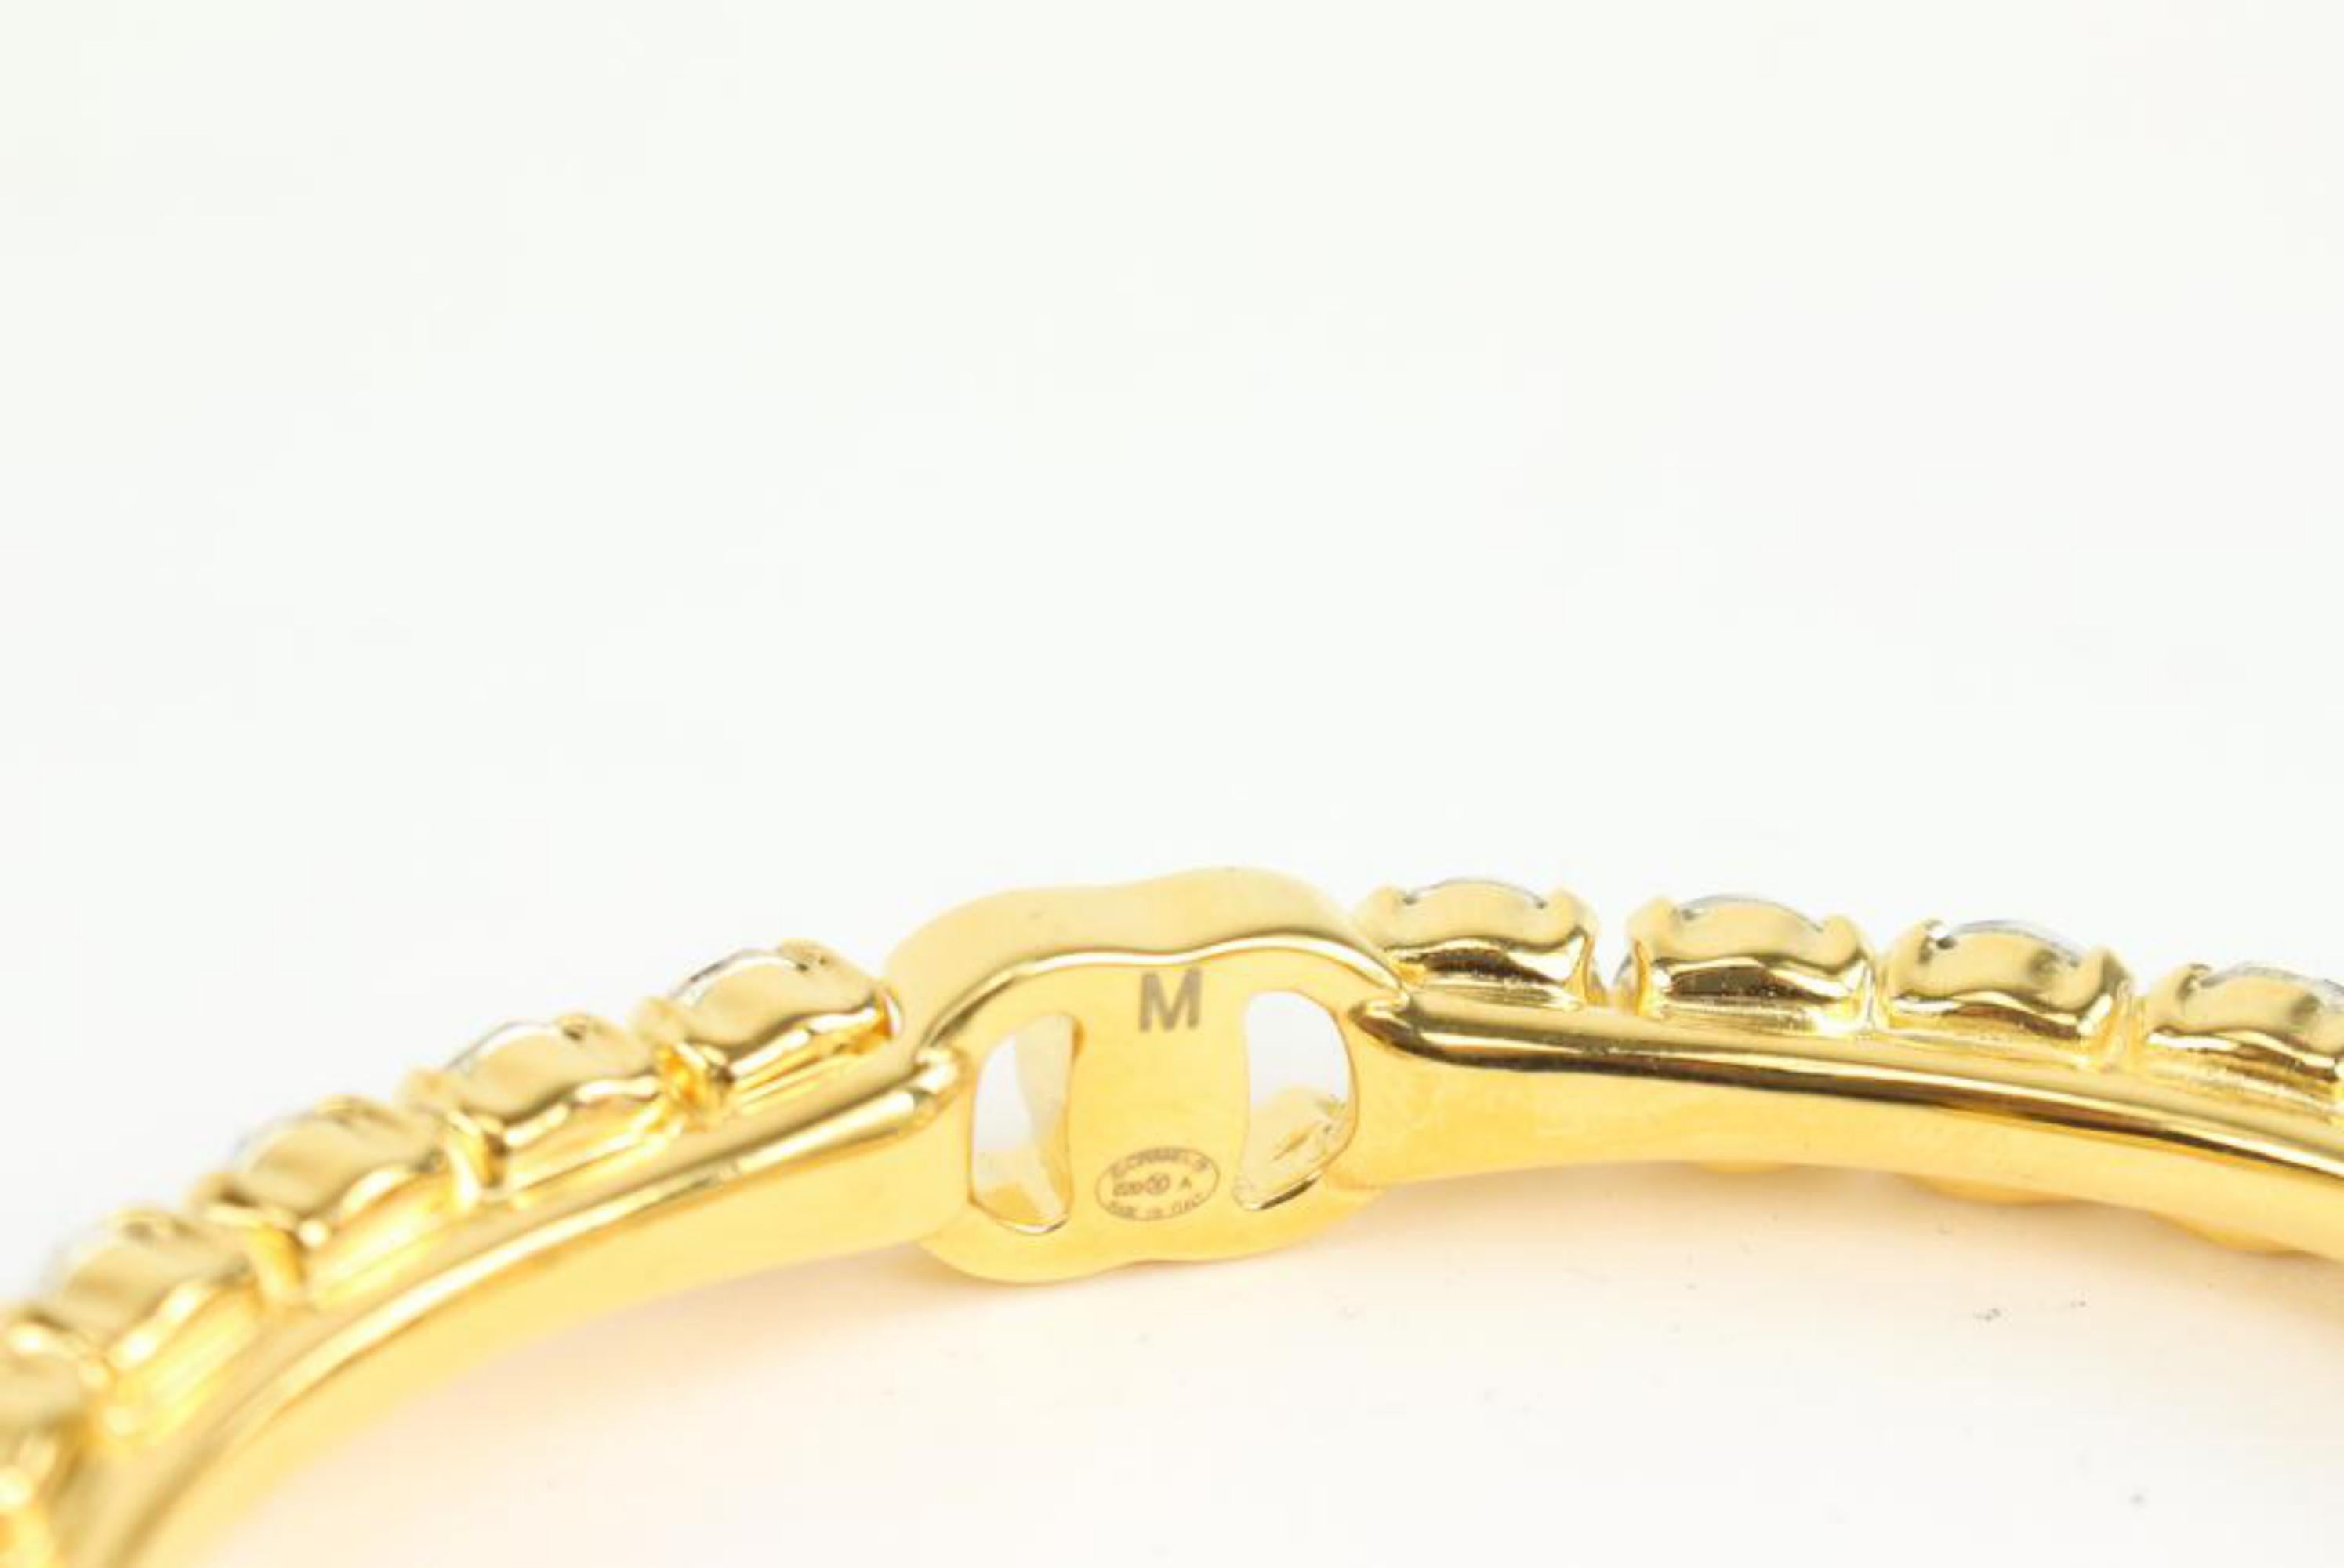 Chanel B20A Gold Crystal More is More CC Turnlock Bangle Bracelet Cuff 1118c6 3